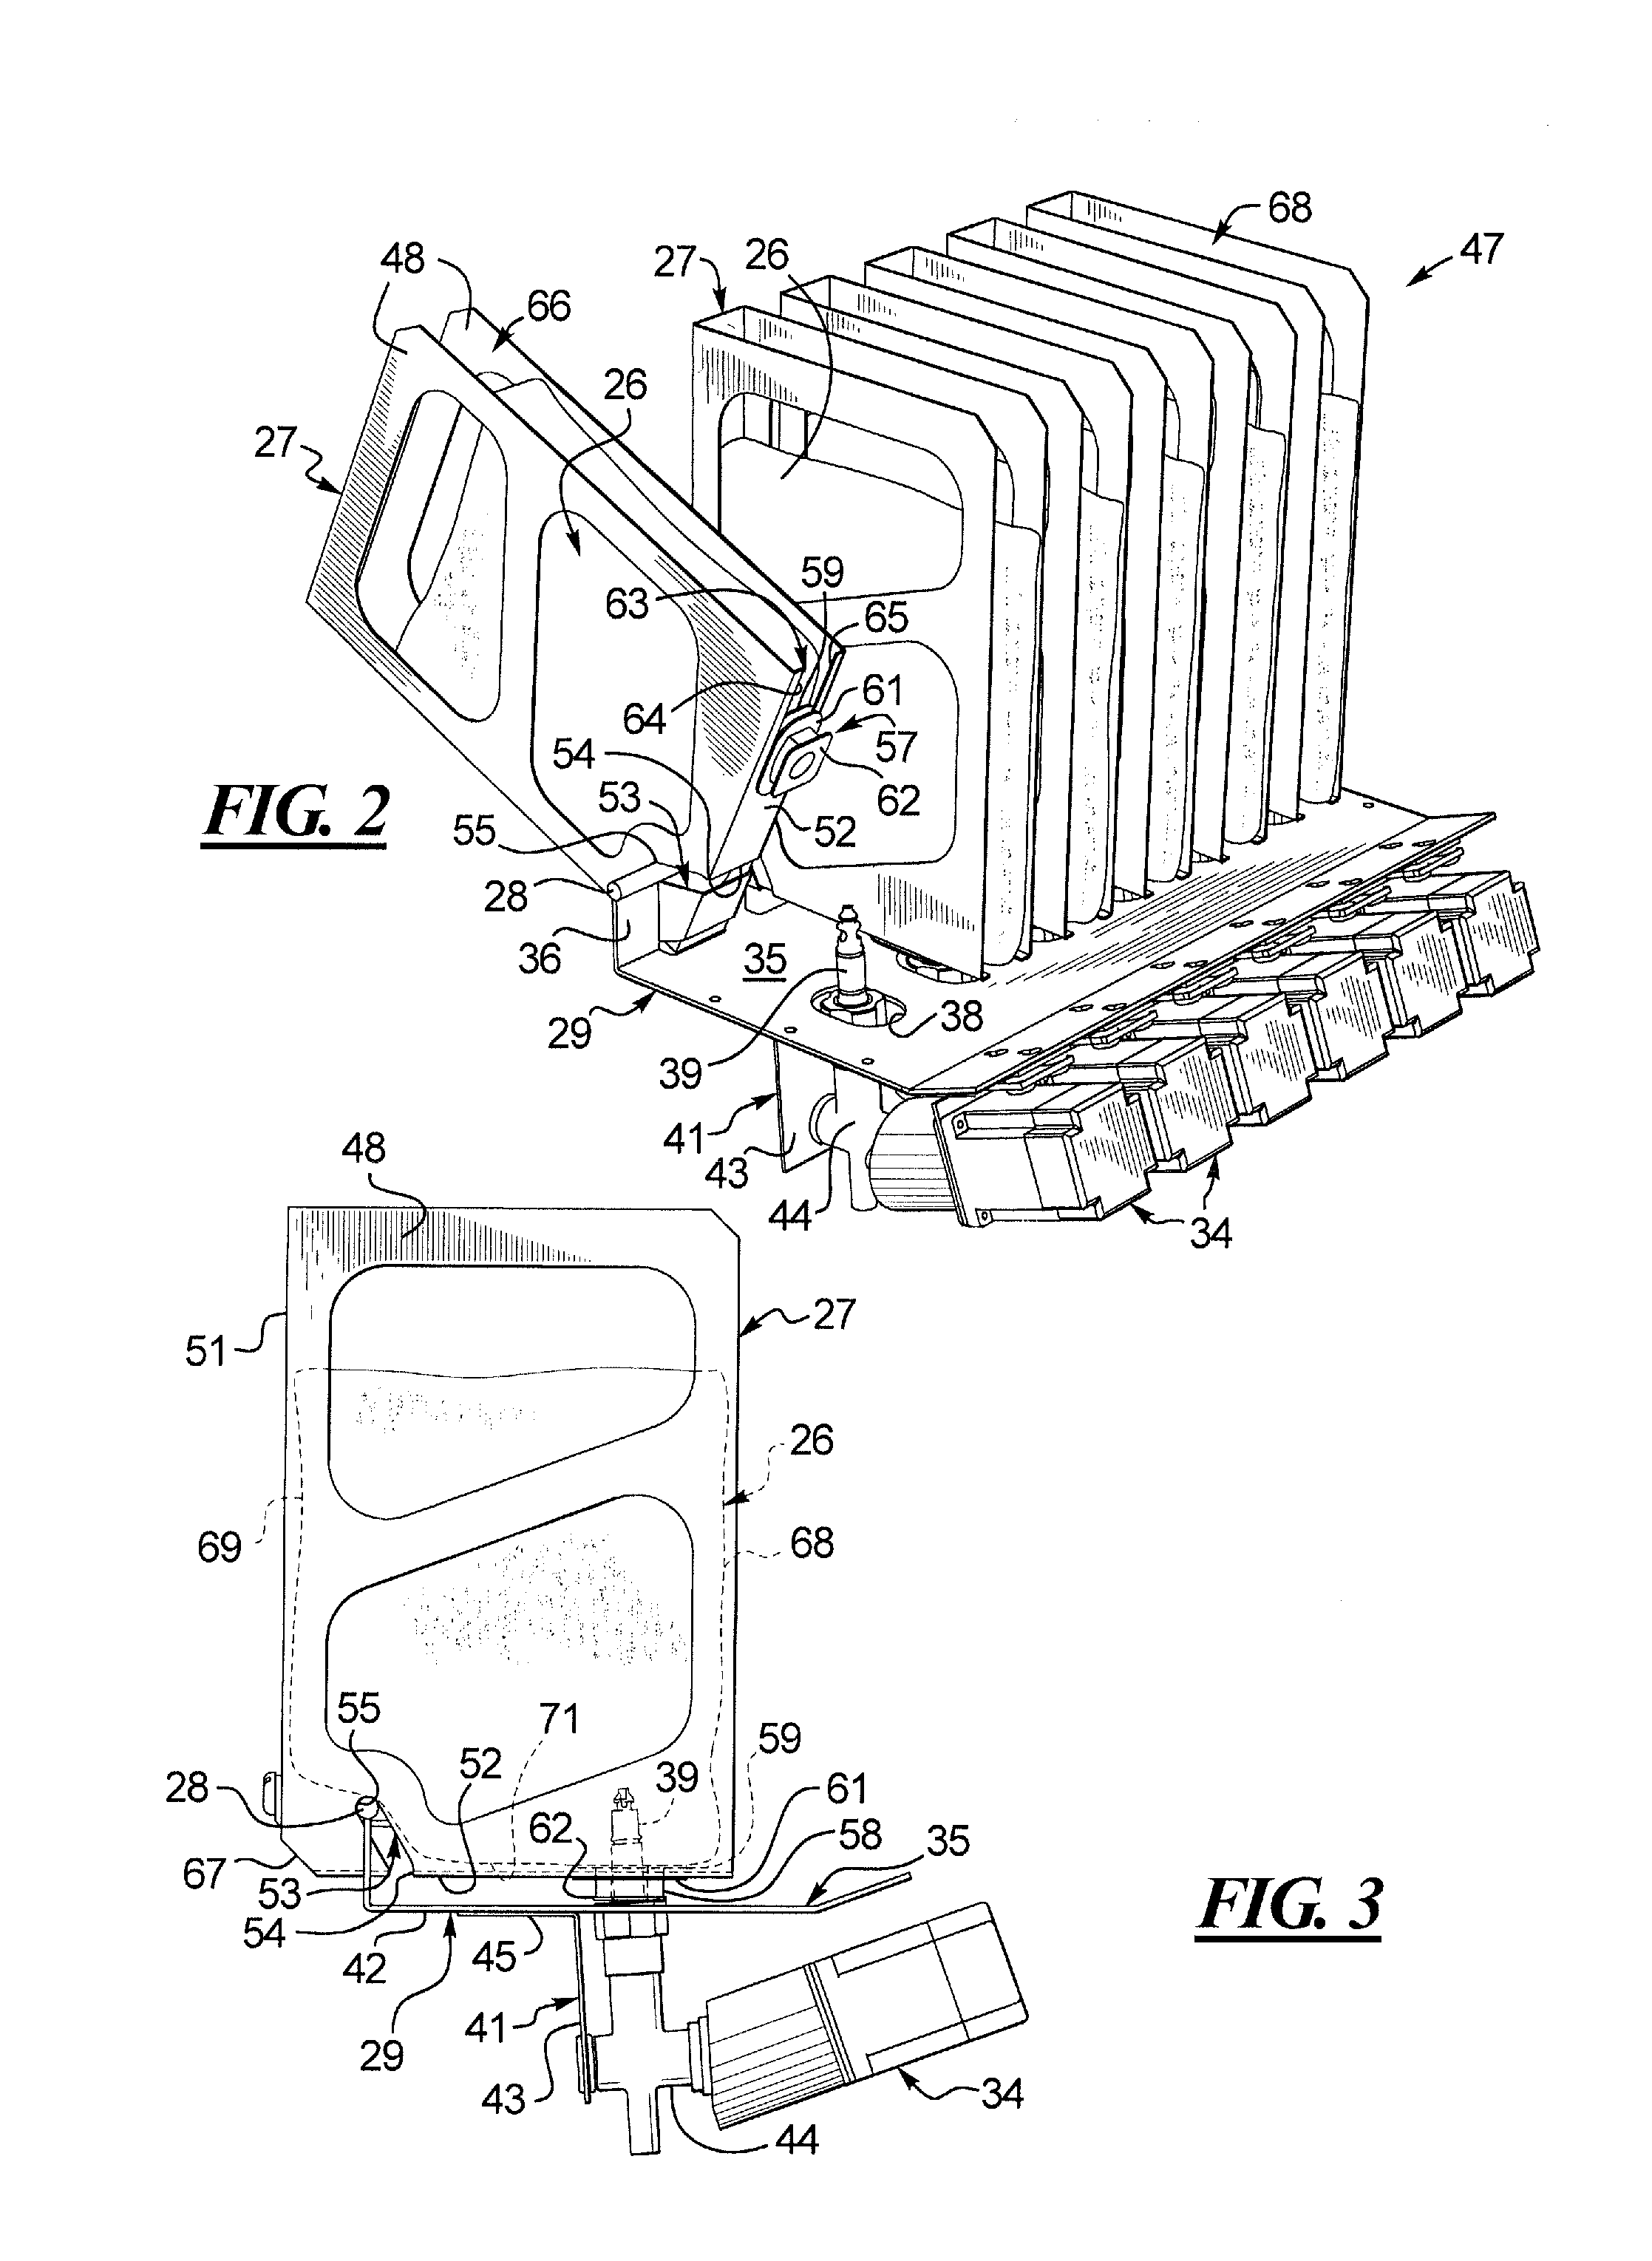 Shelving systems and holders for flexible bags for containing fluid for use in fluid dispensing systems